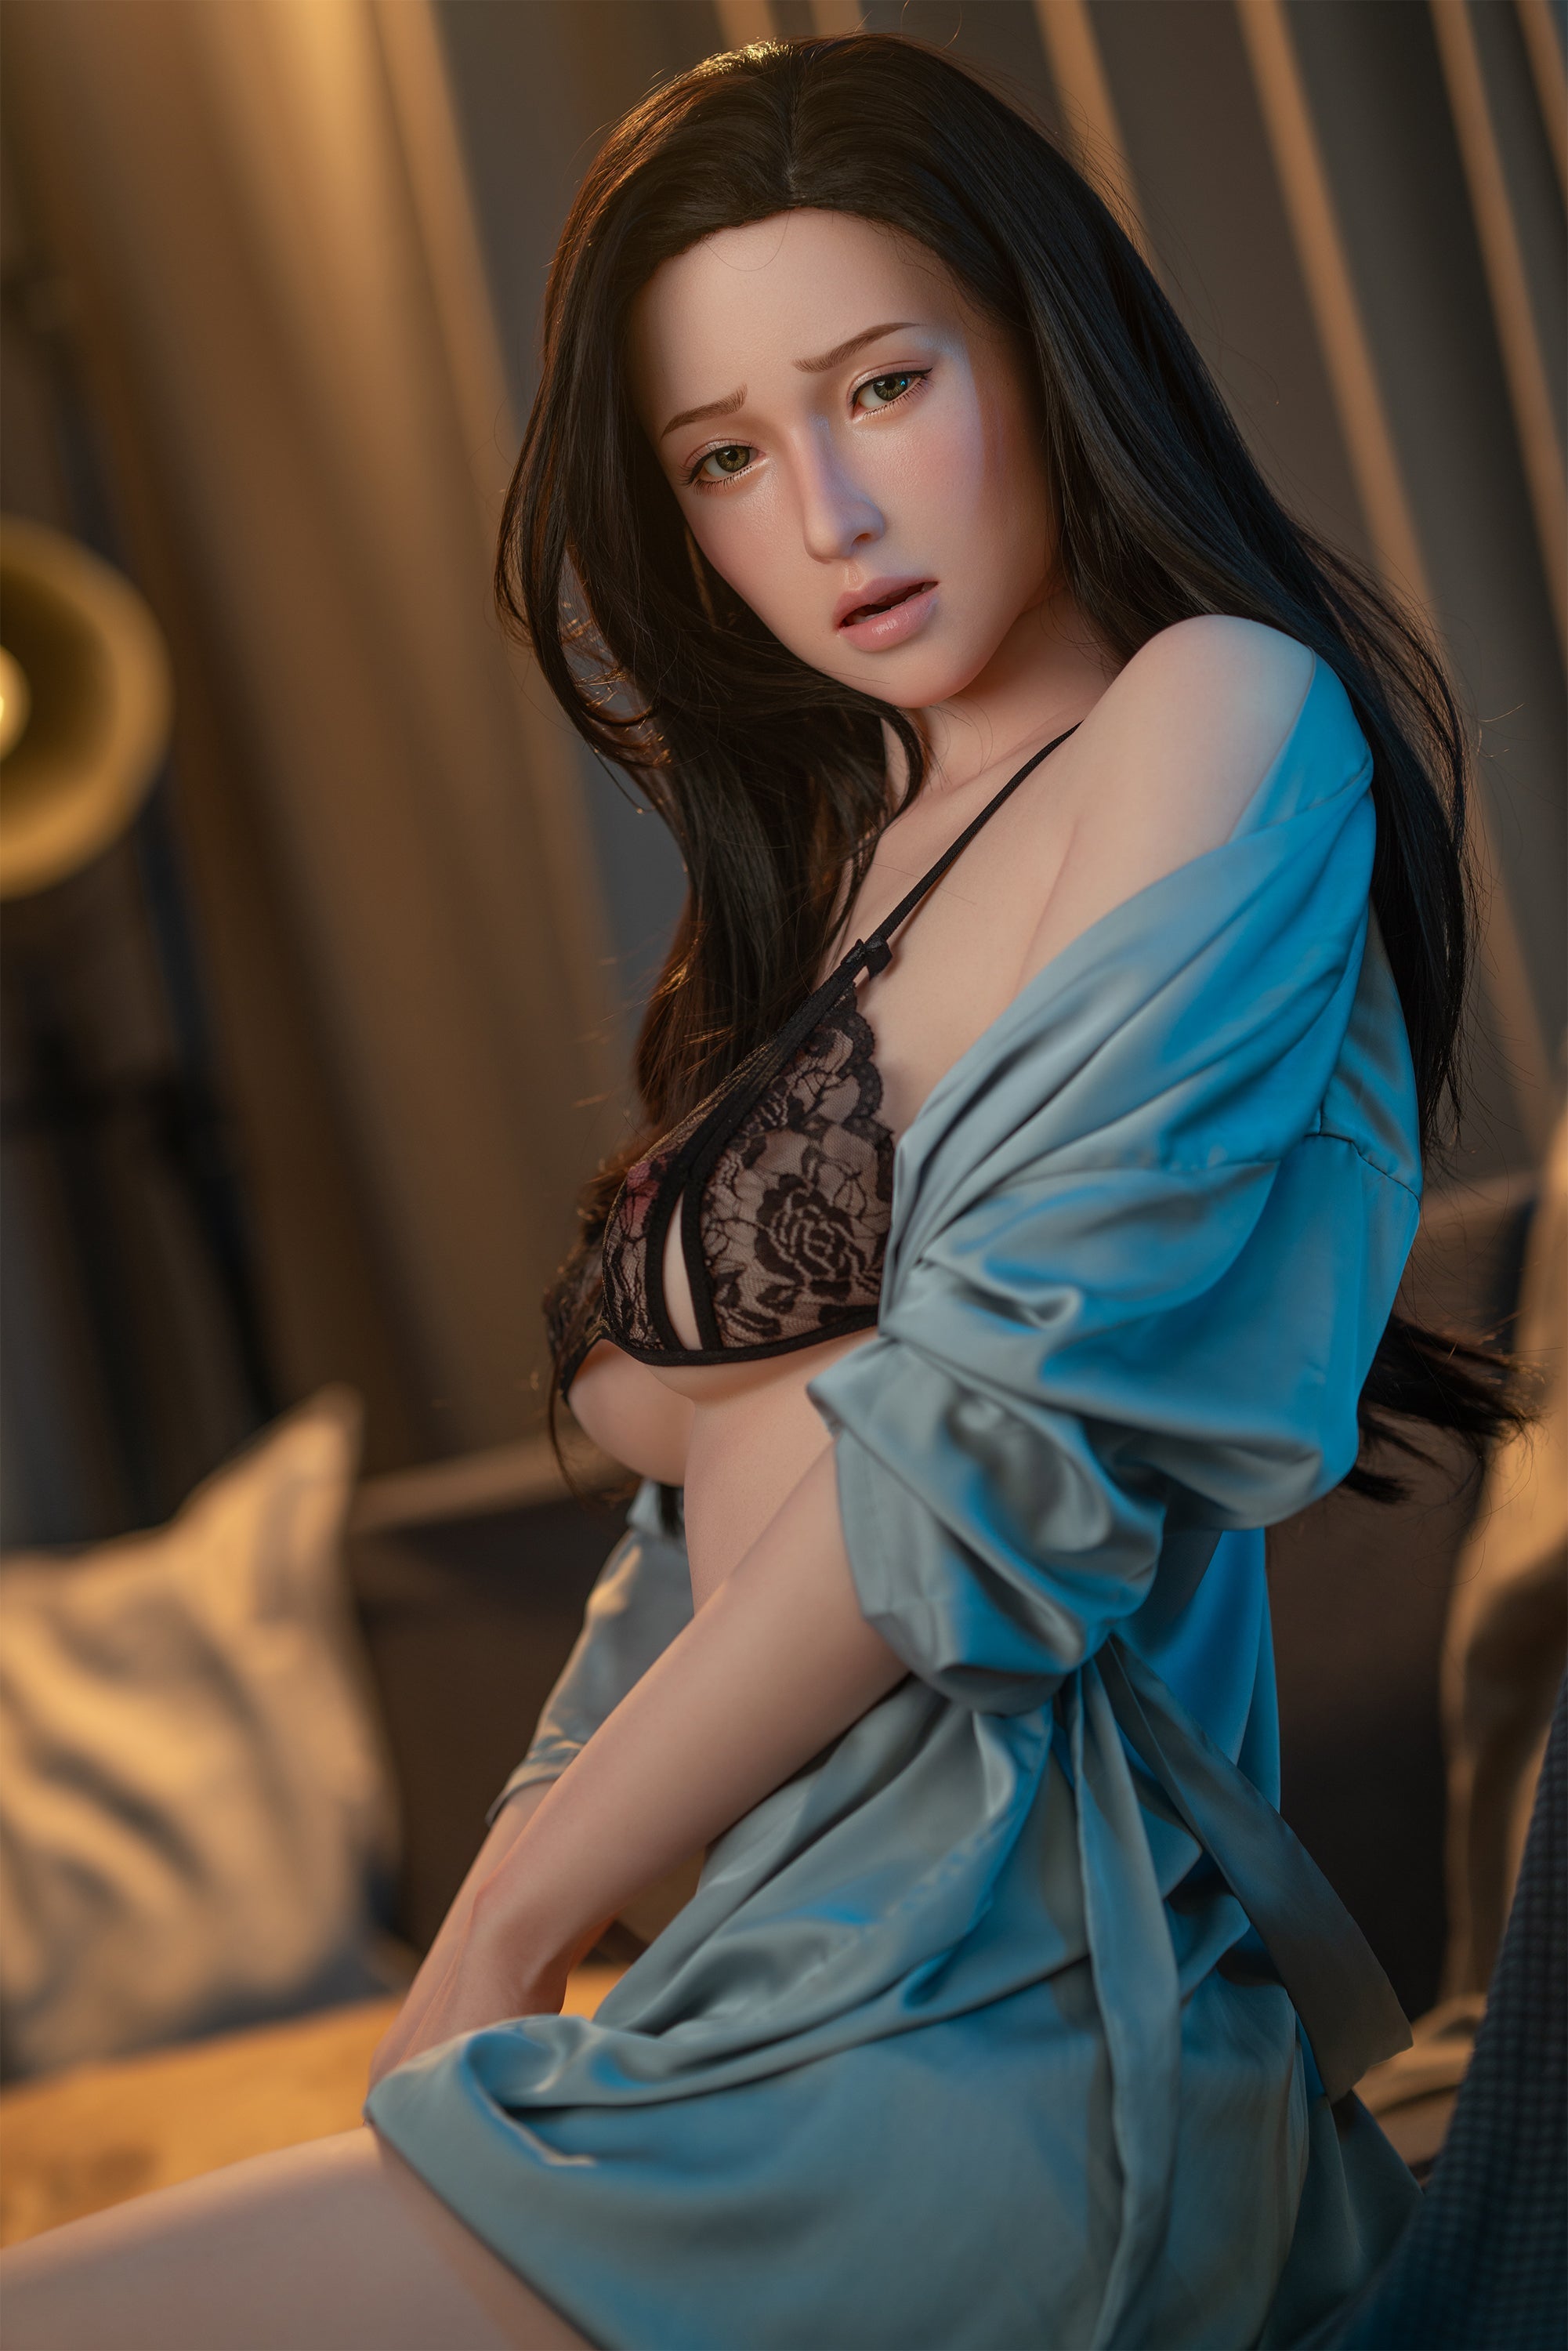 Zelex Doll Inspiration 170 cm C Silicone - Yvonne | Buy Sex Dolls at DOLLS ACTUALLY